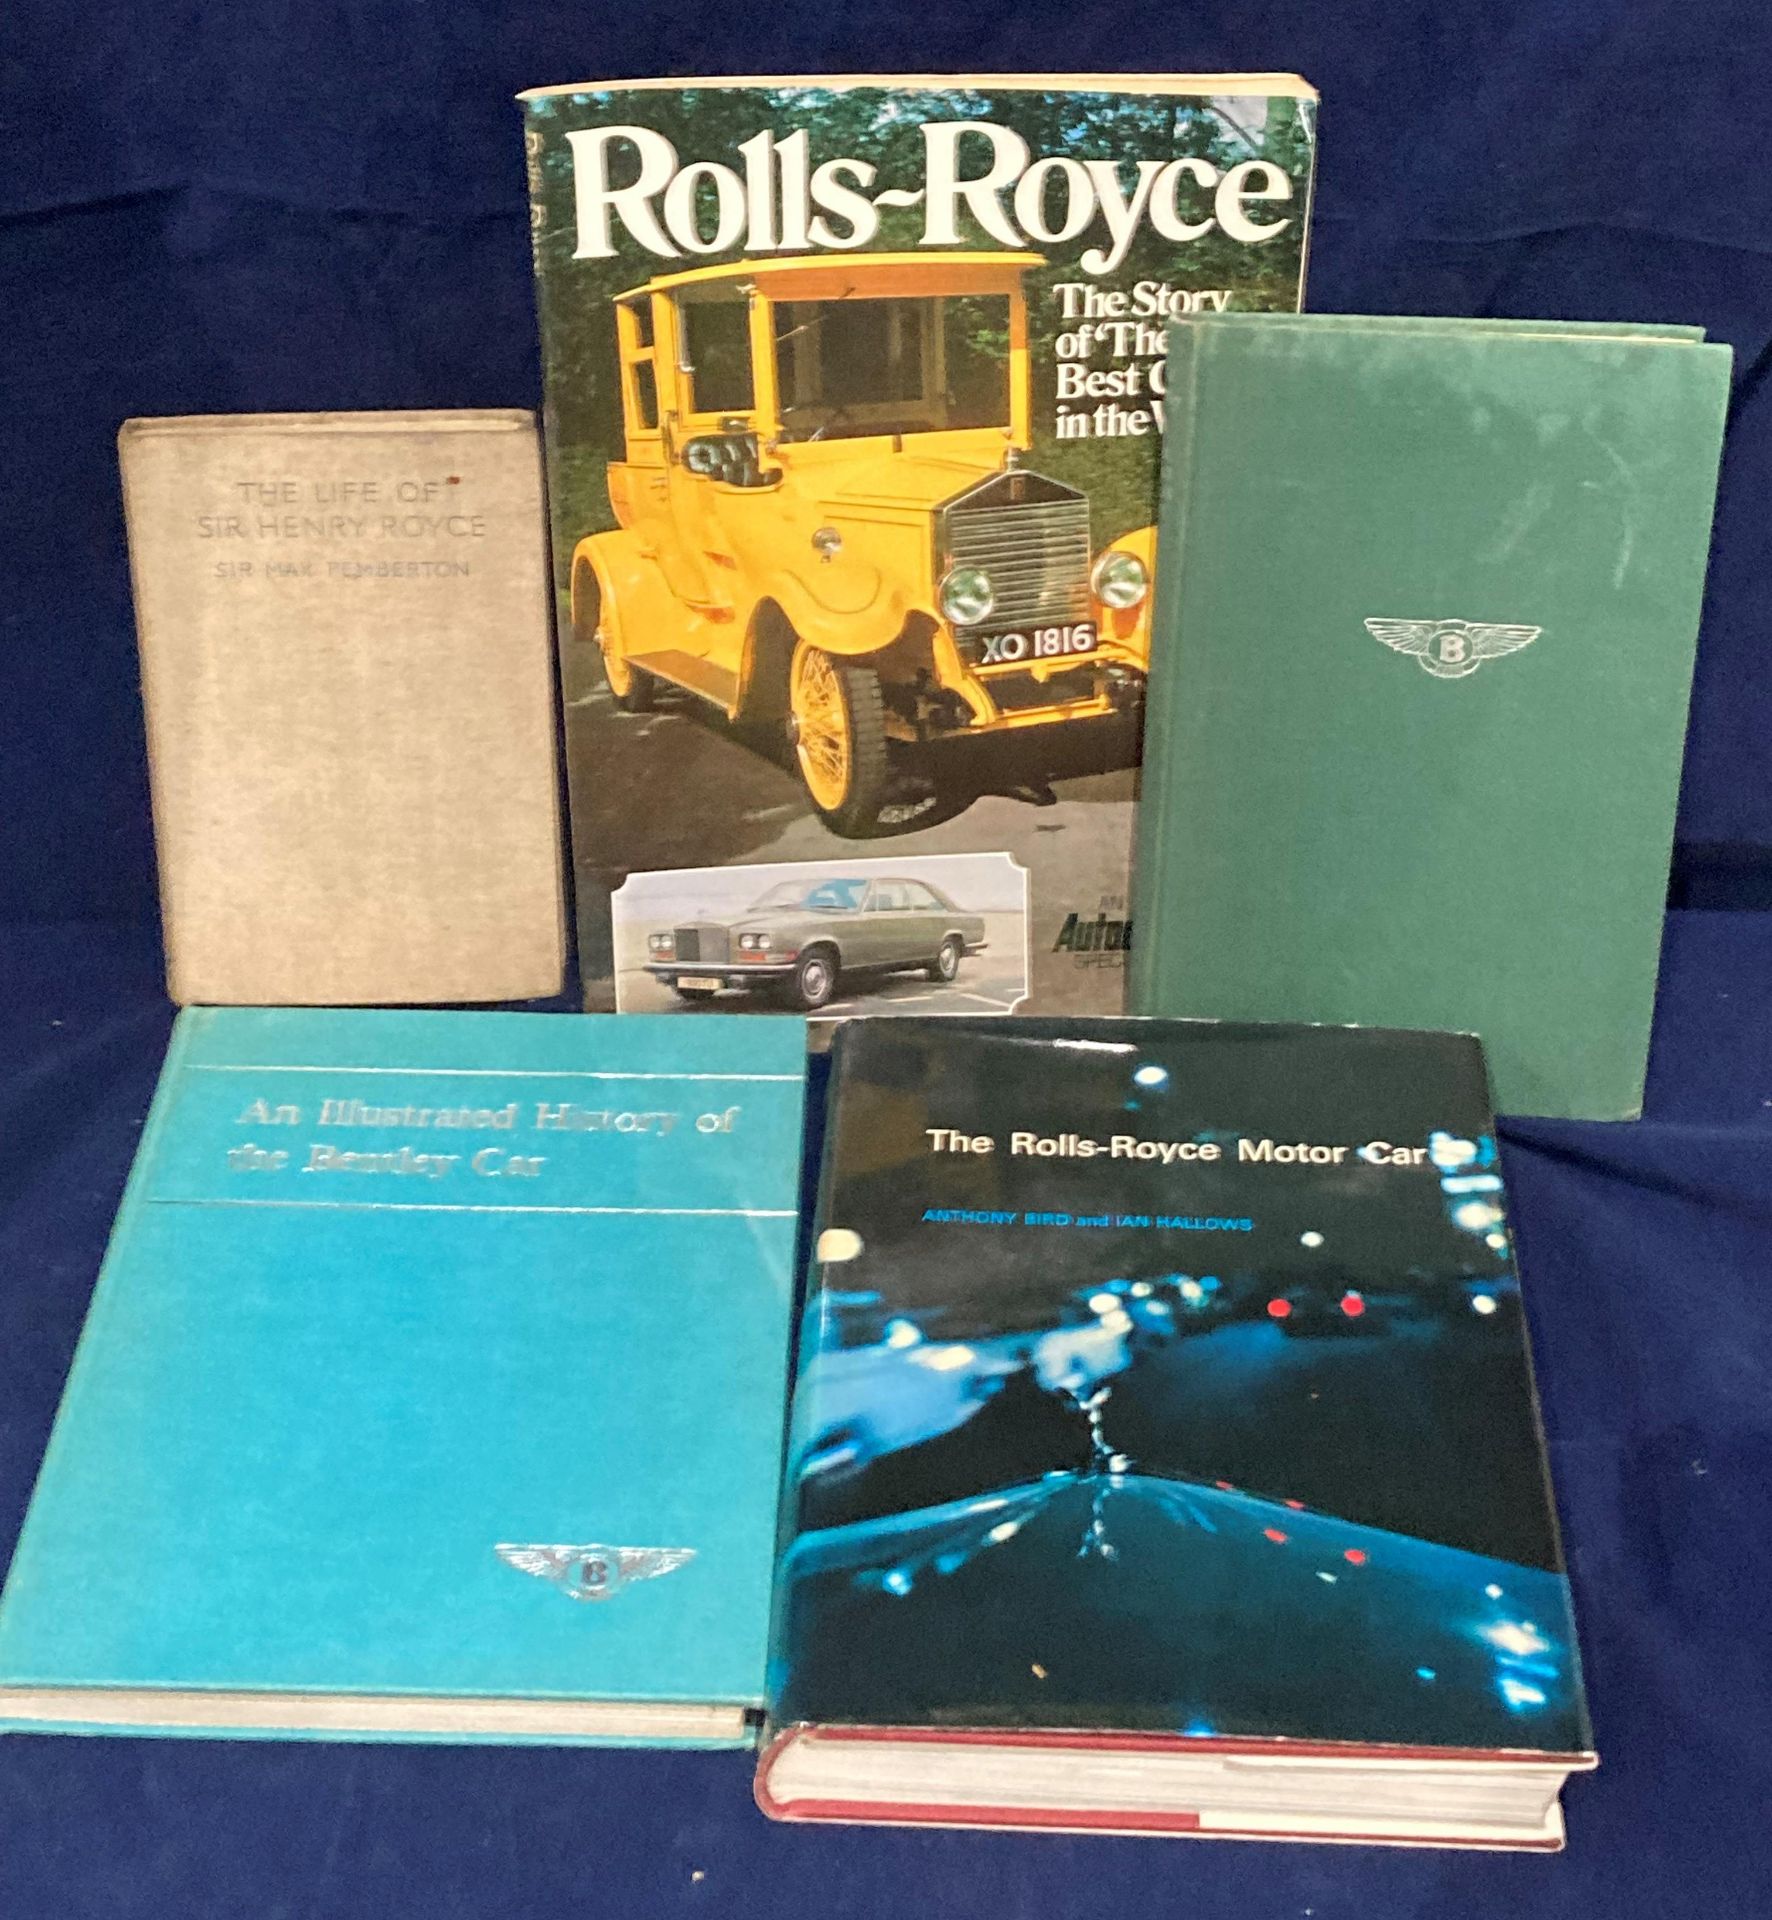 Rolls-Royce, The Story of ‘The Best Car in the World’ An Autocar Special,